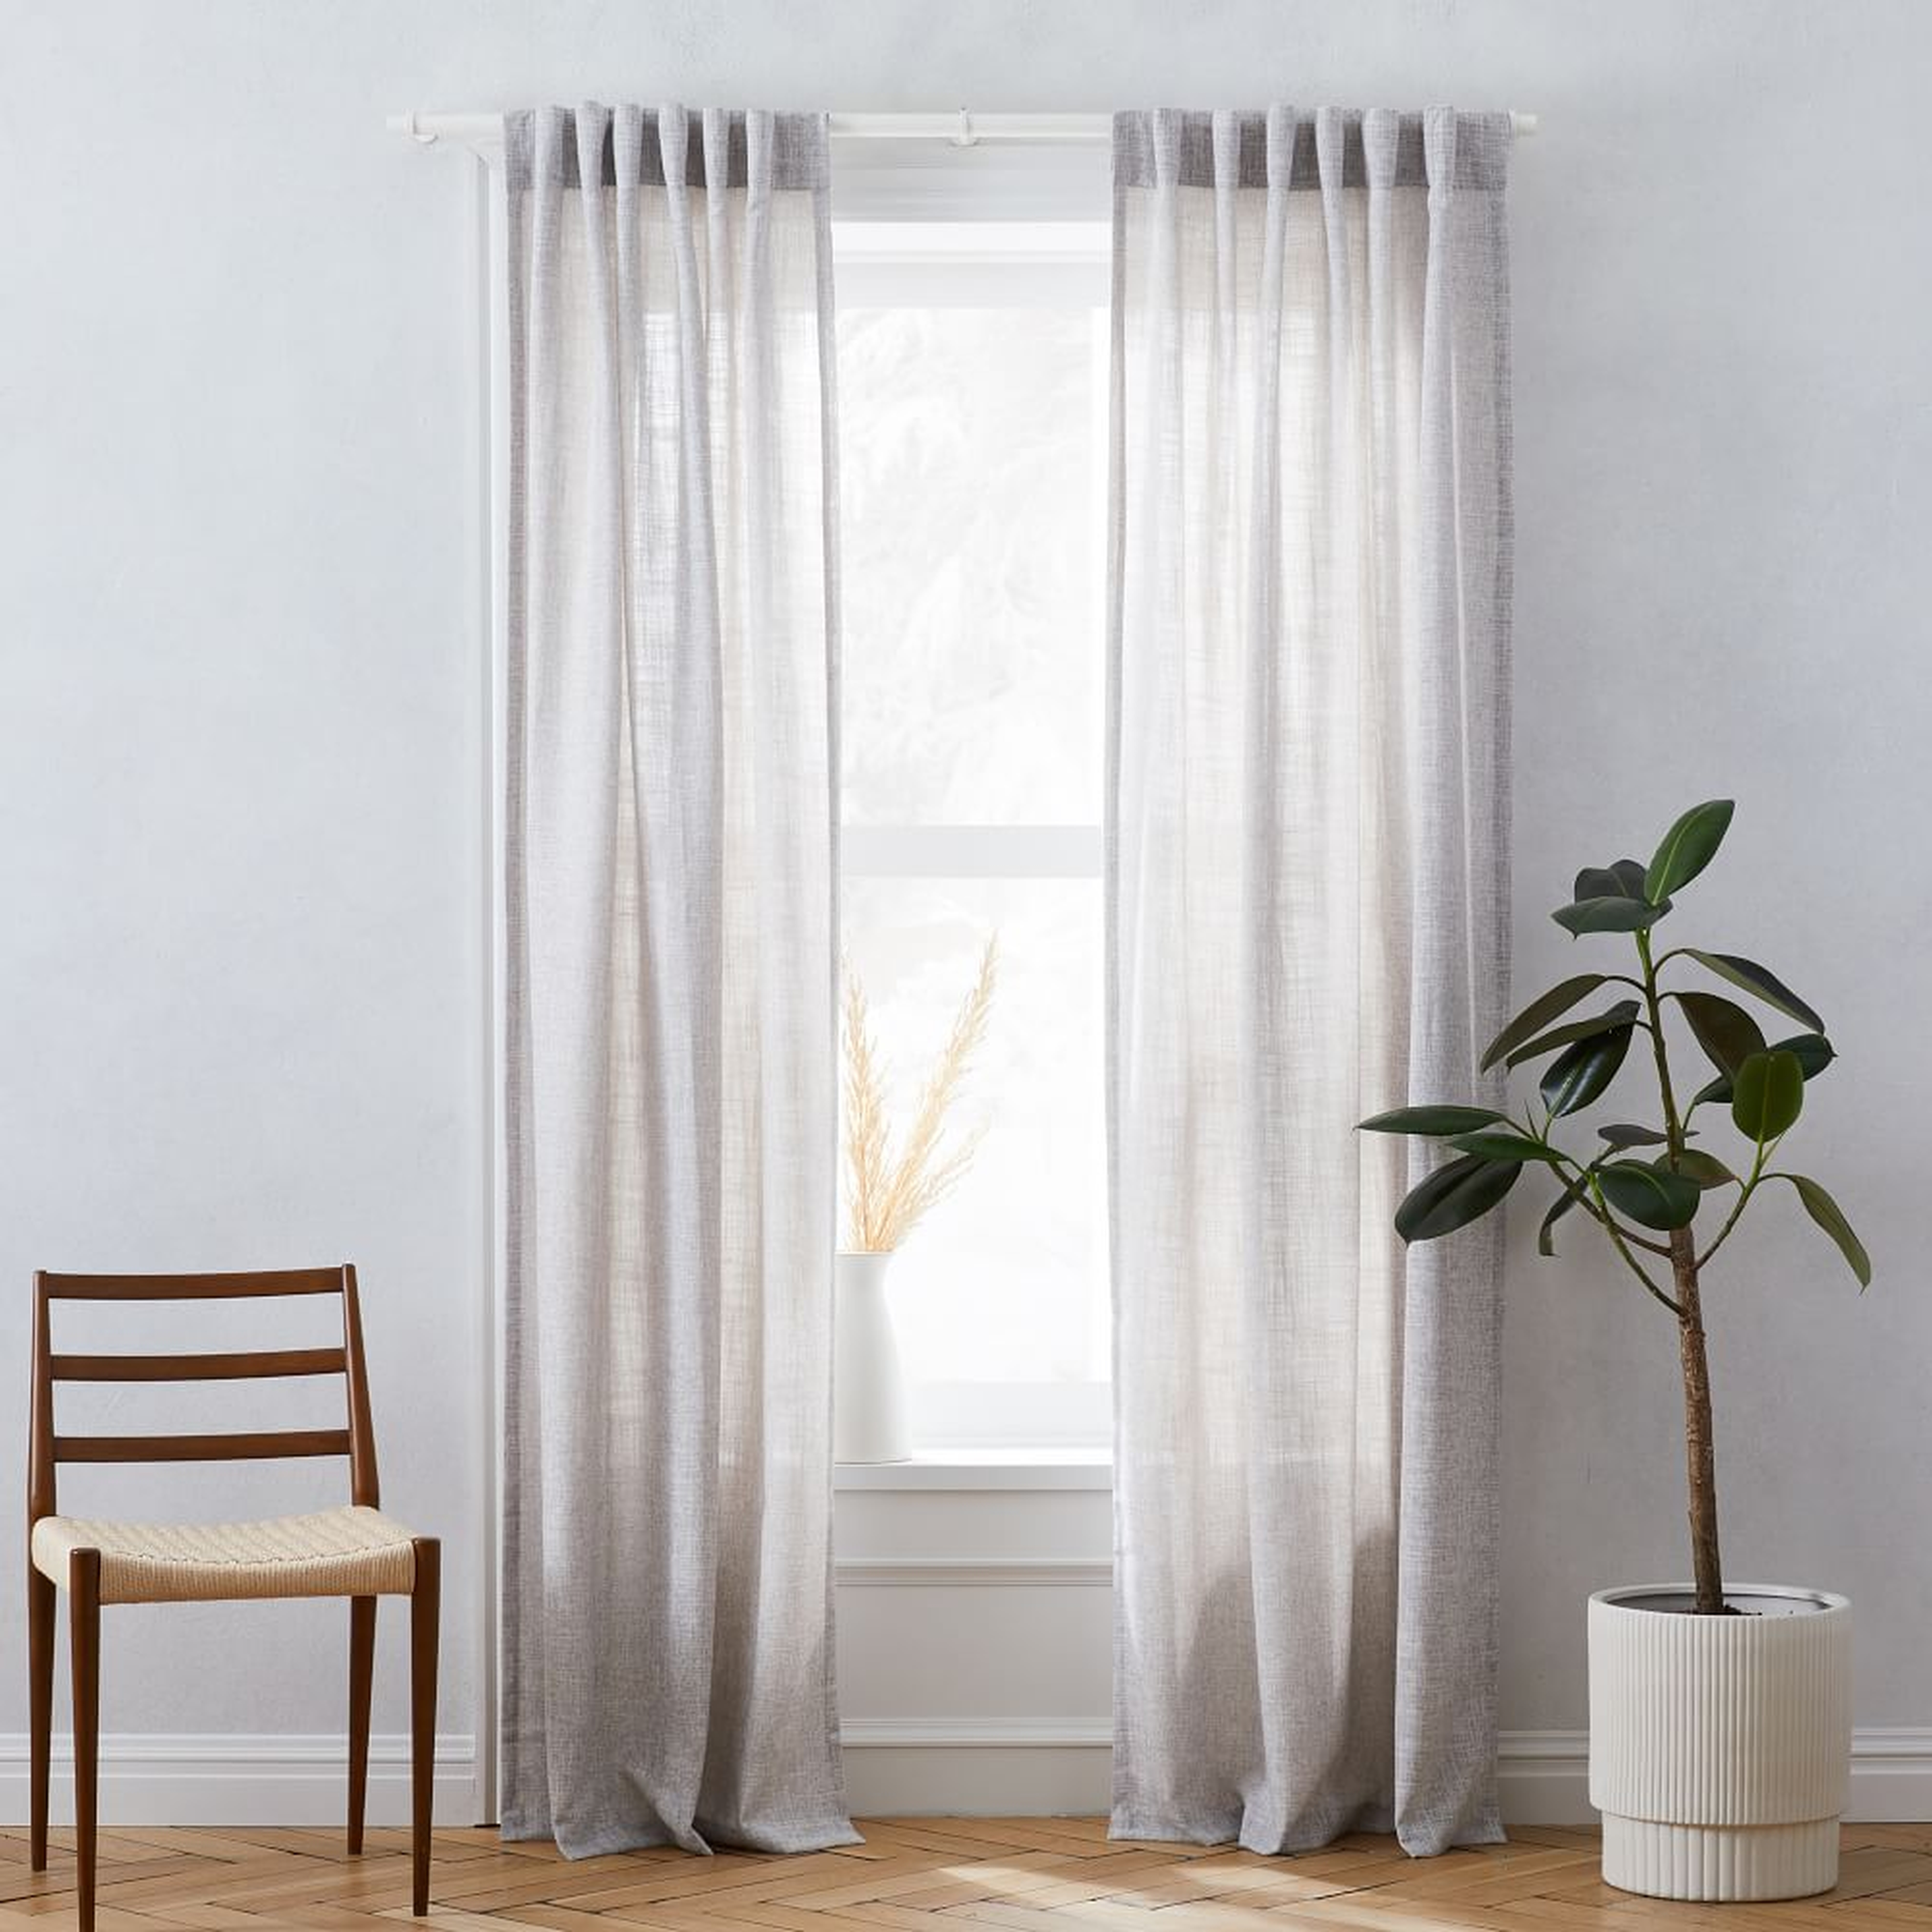 Crossweave Curtain with Blackout Lining, Stone White, 48"X96" - West Elm